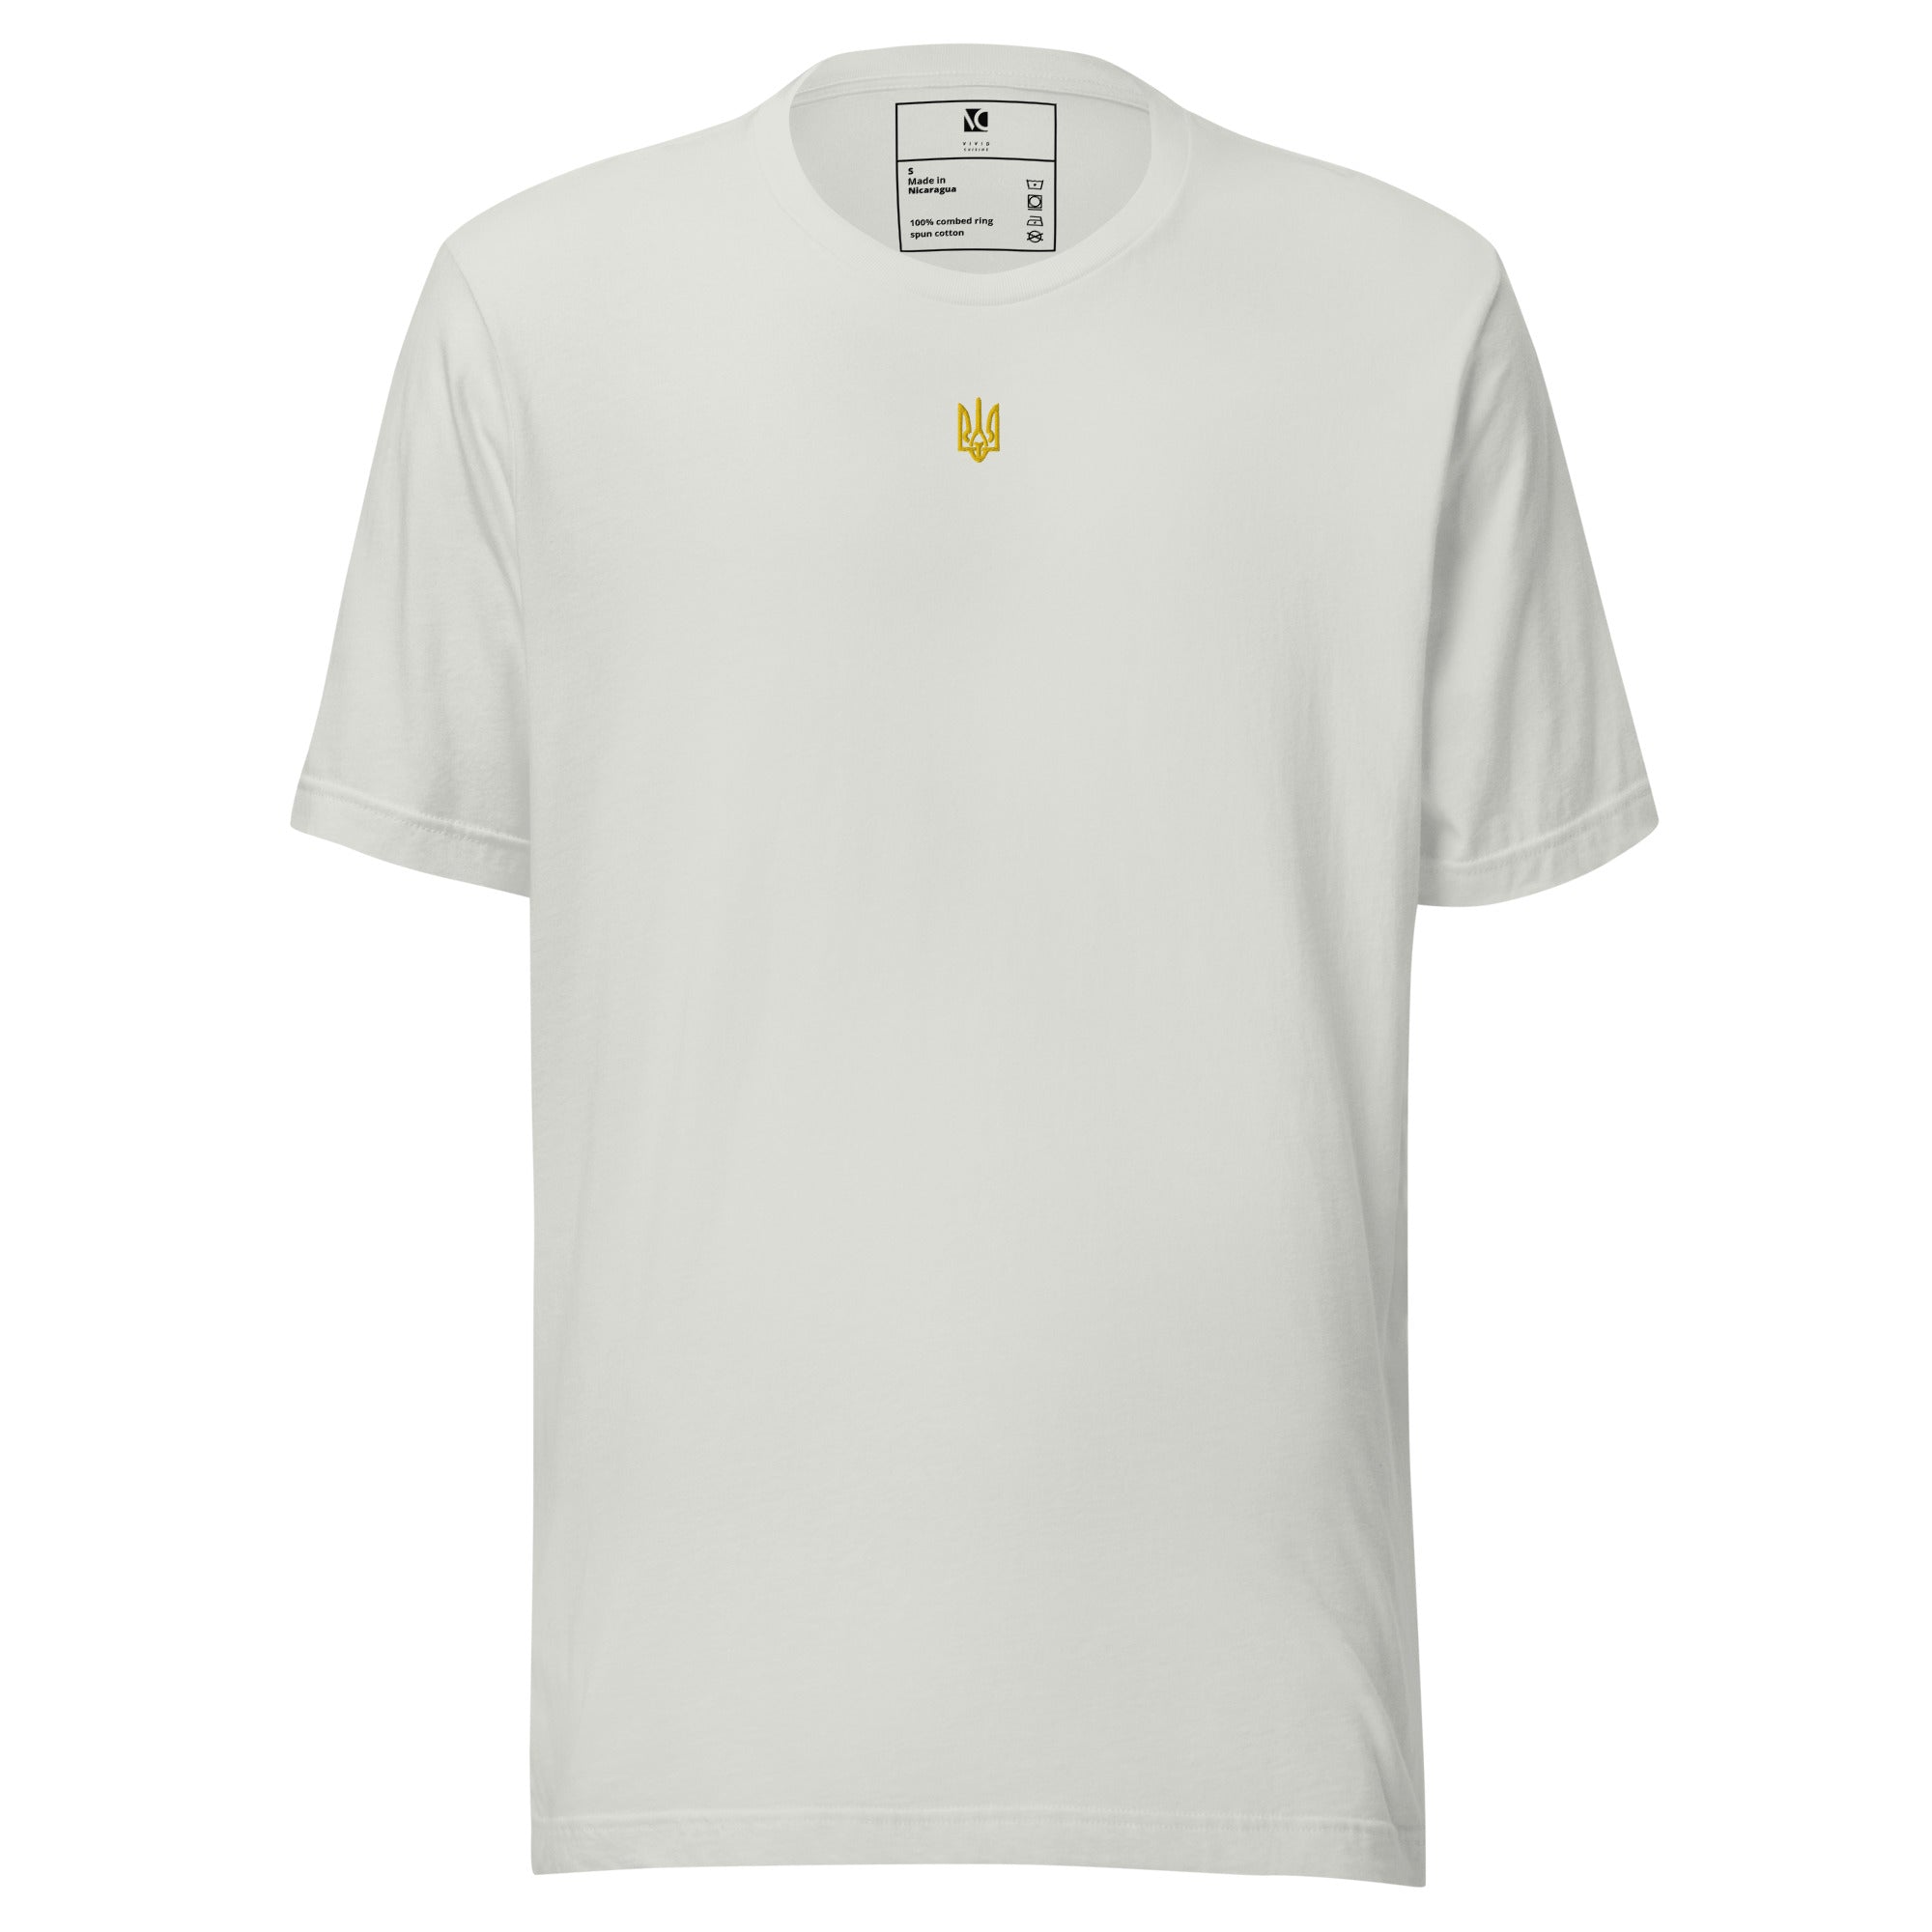 Embroidered Ukraine Coat of Arms (Gold) - Unisex T-Shirt